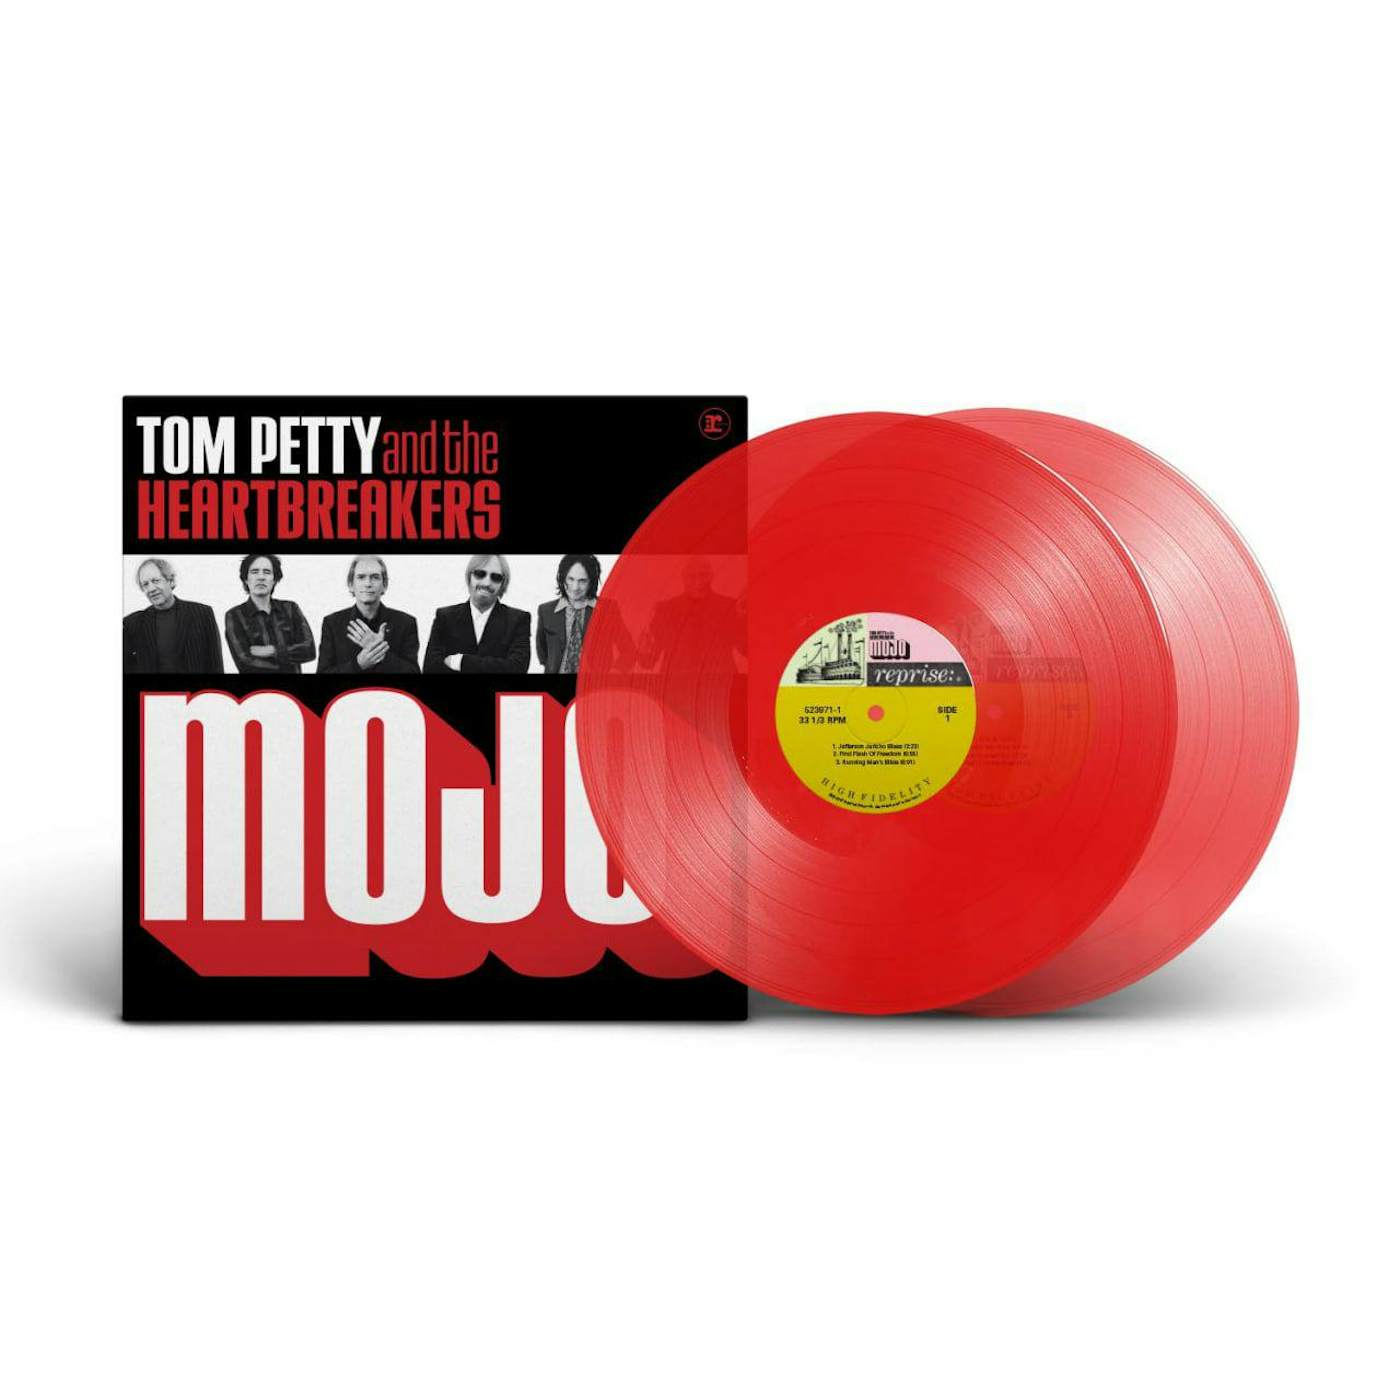 Tom Petty and the Heartbreakers Mojo (Red) Vinyl Record